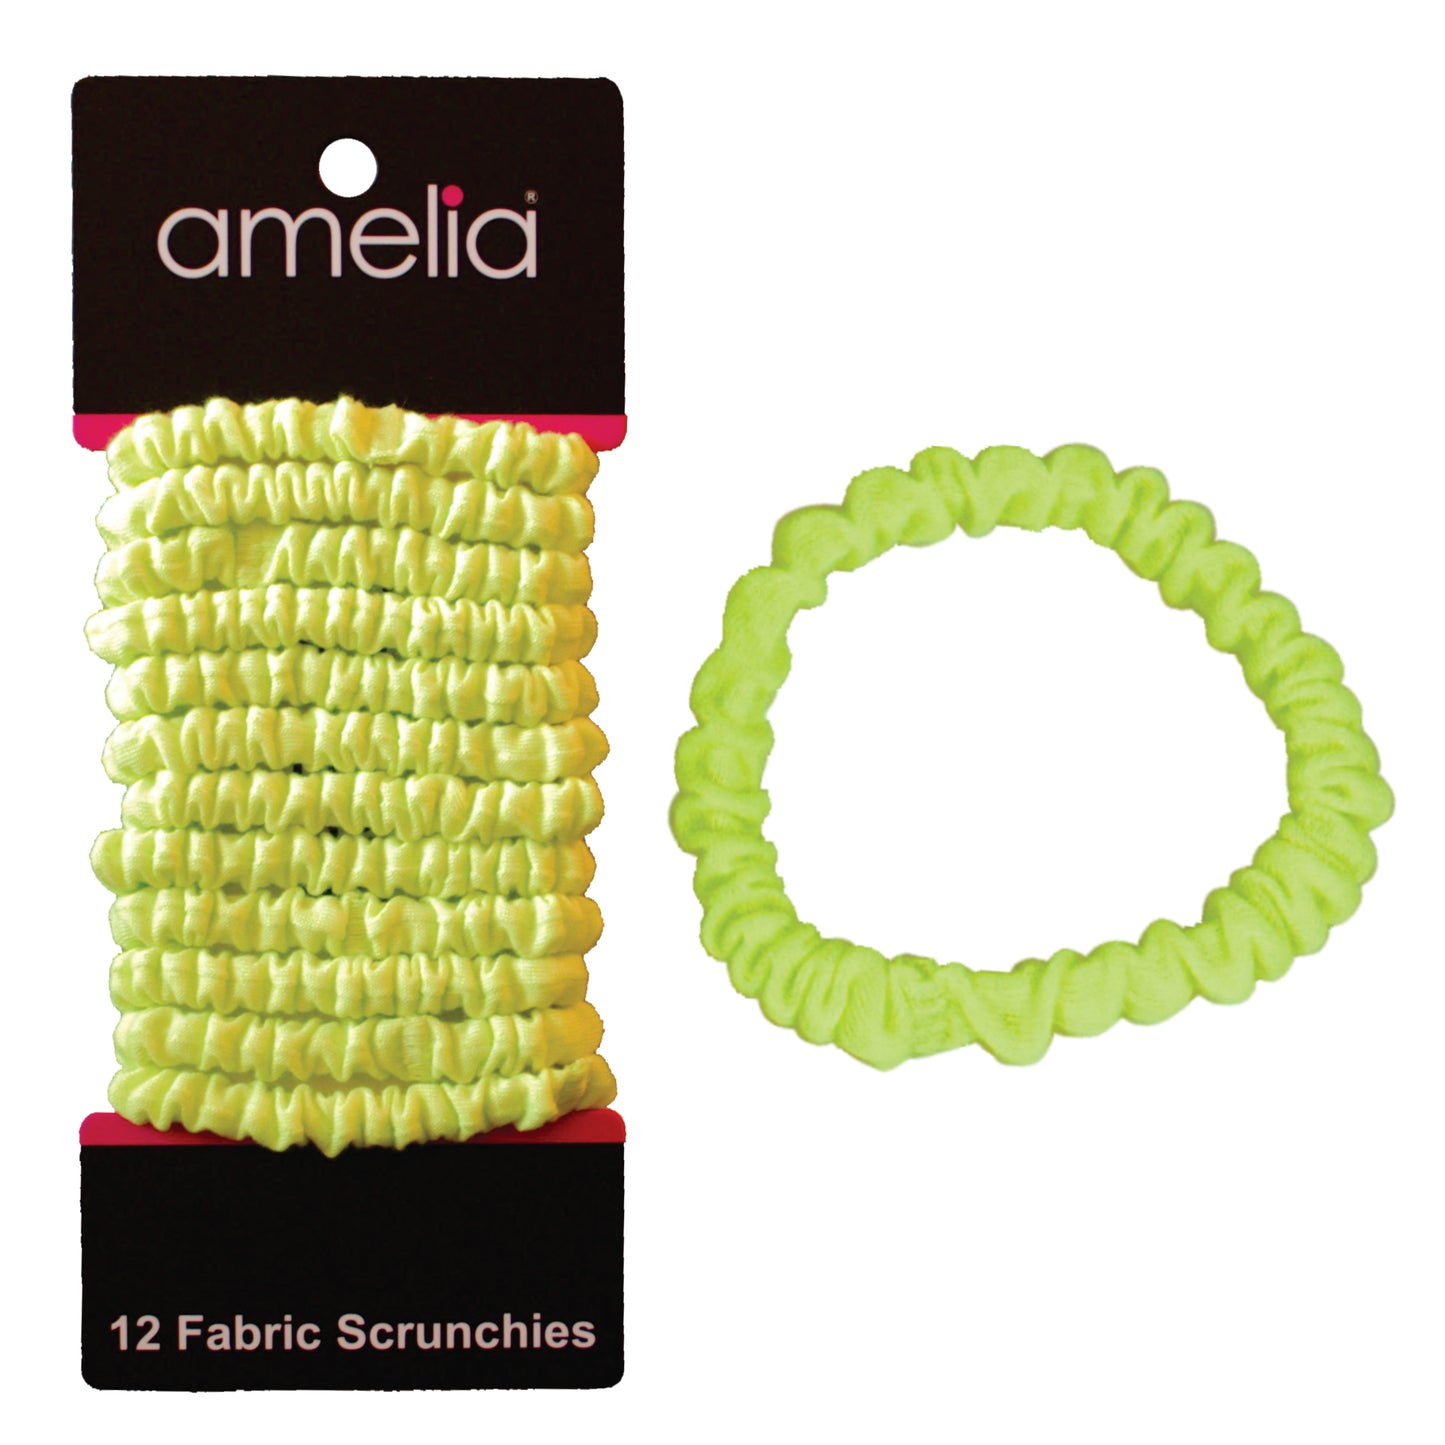 Amelia Beauty, Neon Yellow Skinny Jersey Scrunchies, 2.125in Diameter, Gentle on Hair, Strong Hold, No Snag, No Dents or Creases. 12 Pack